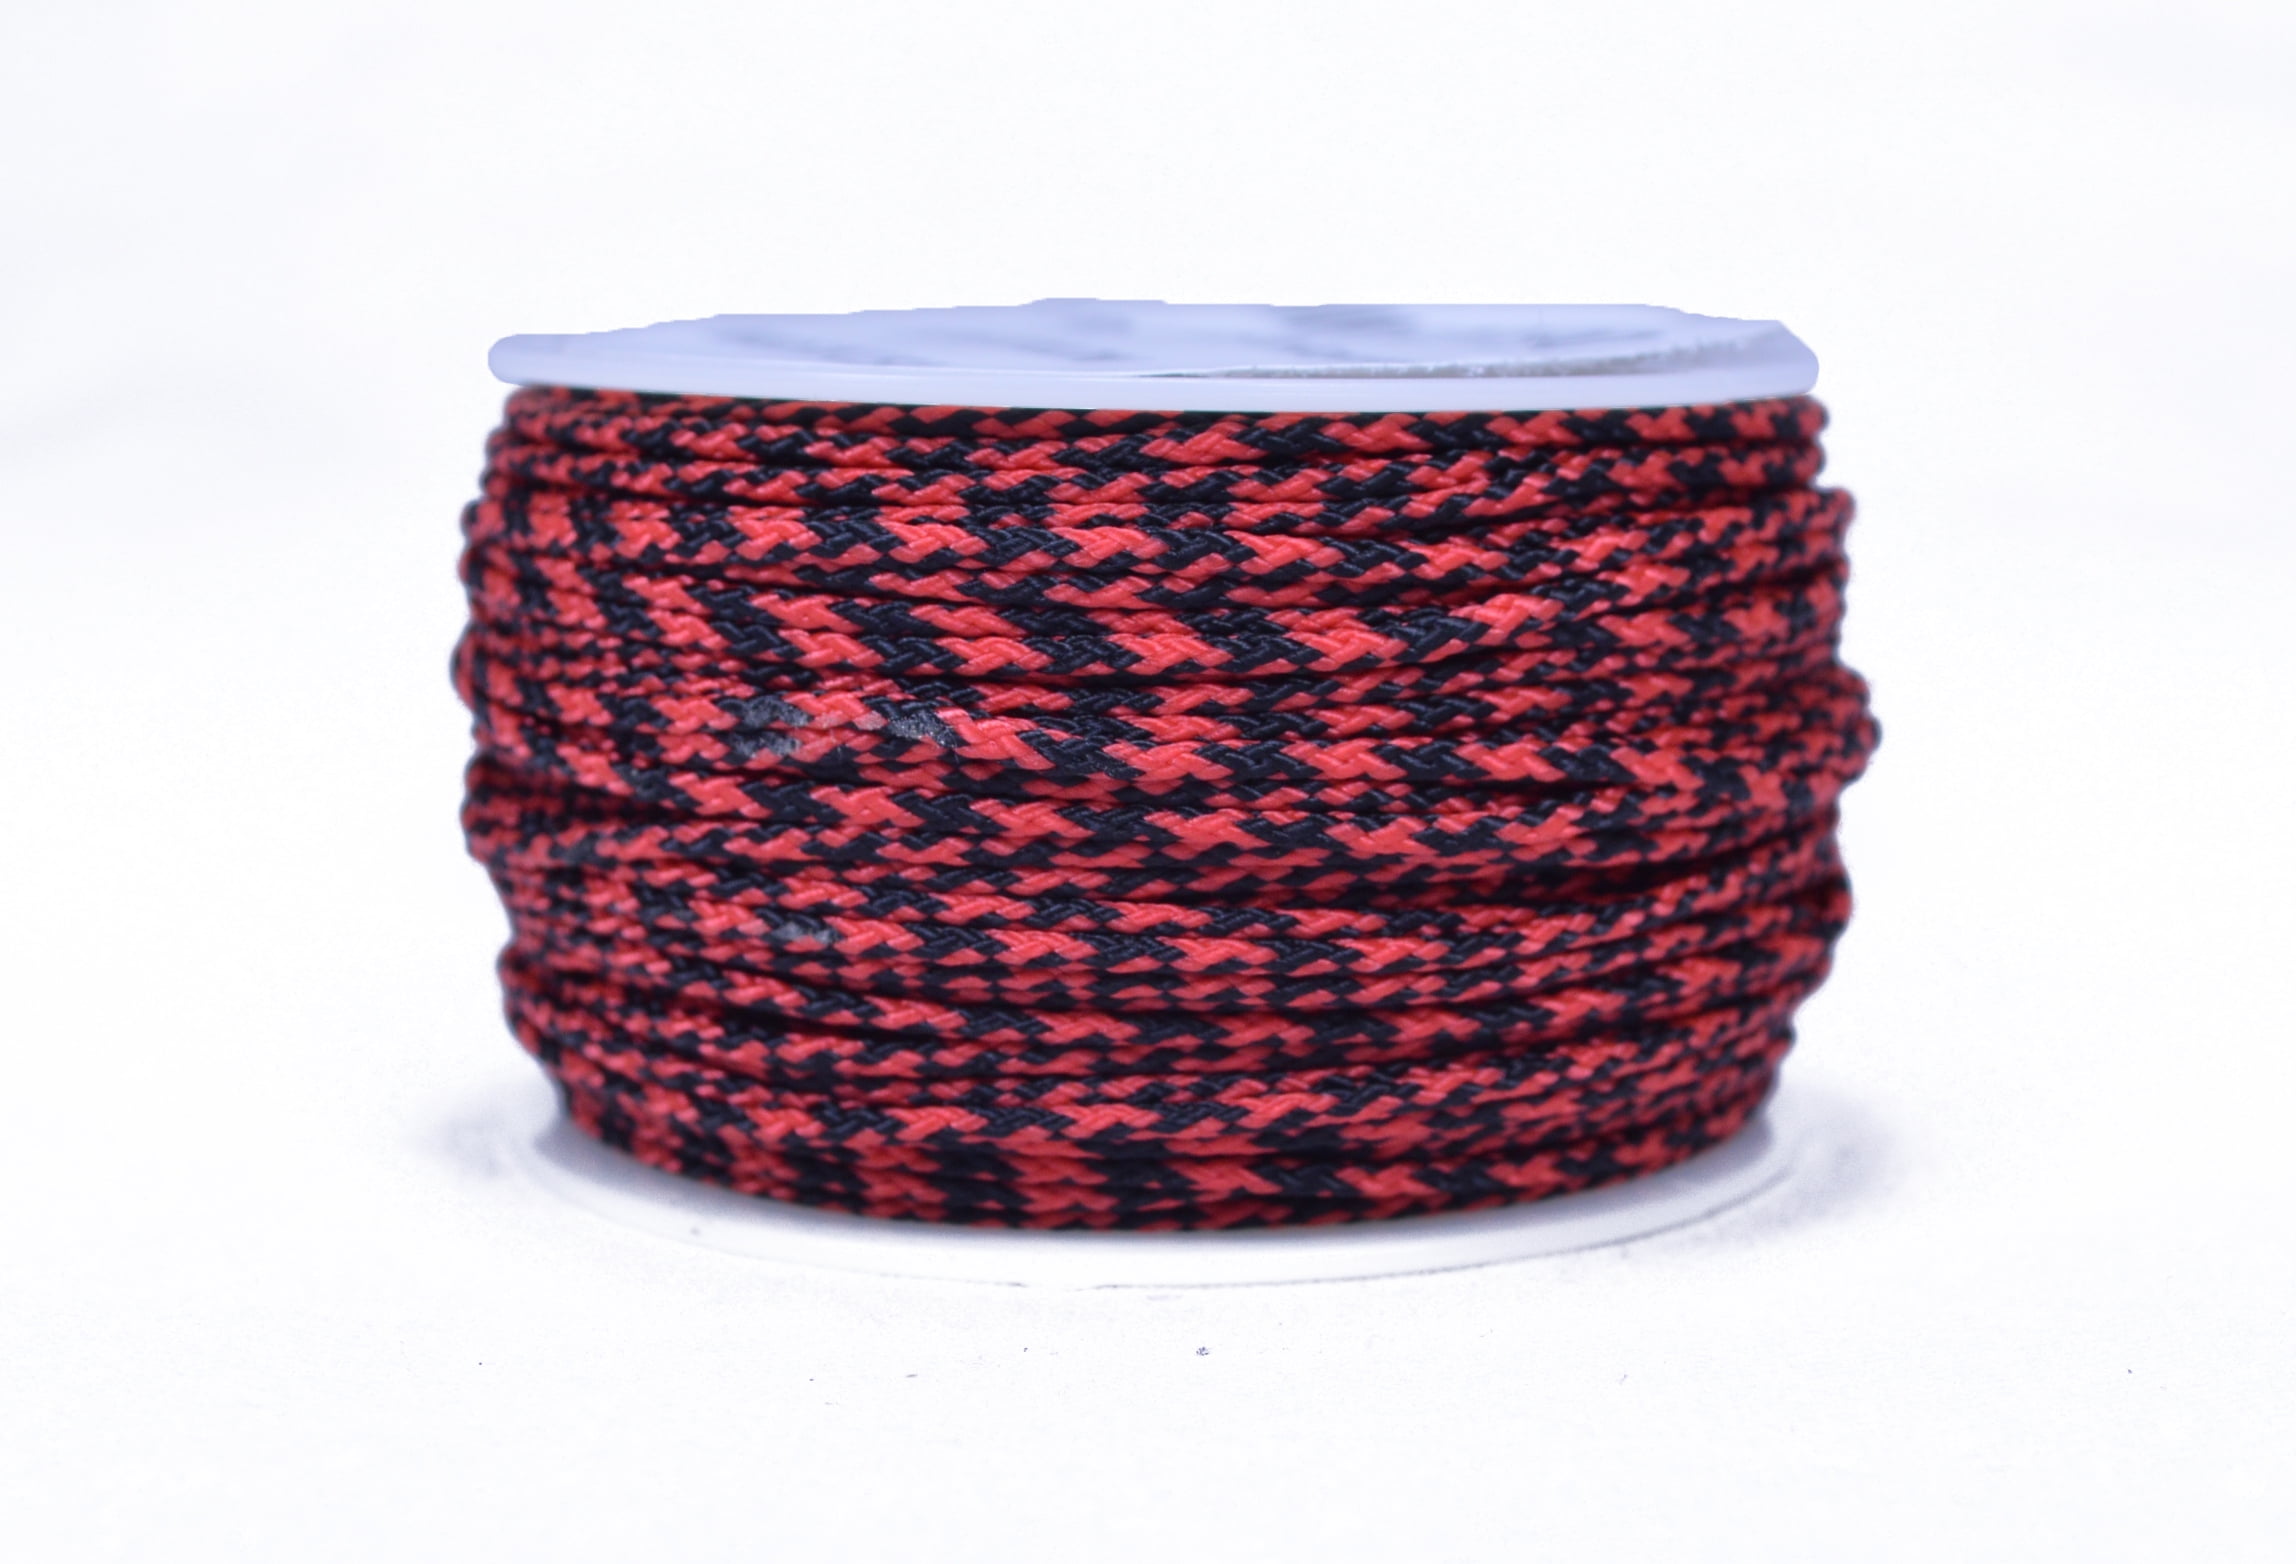 Wholesale 1mm, 1/16inch,2mm,3mm micro paracord